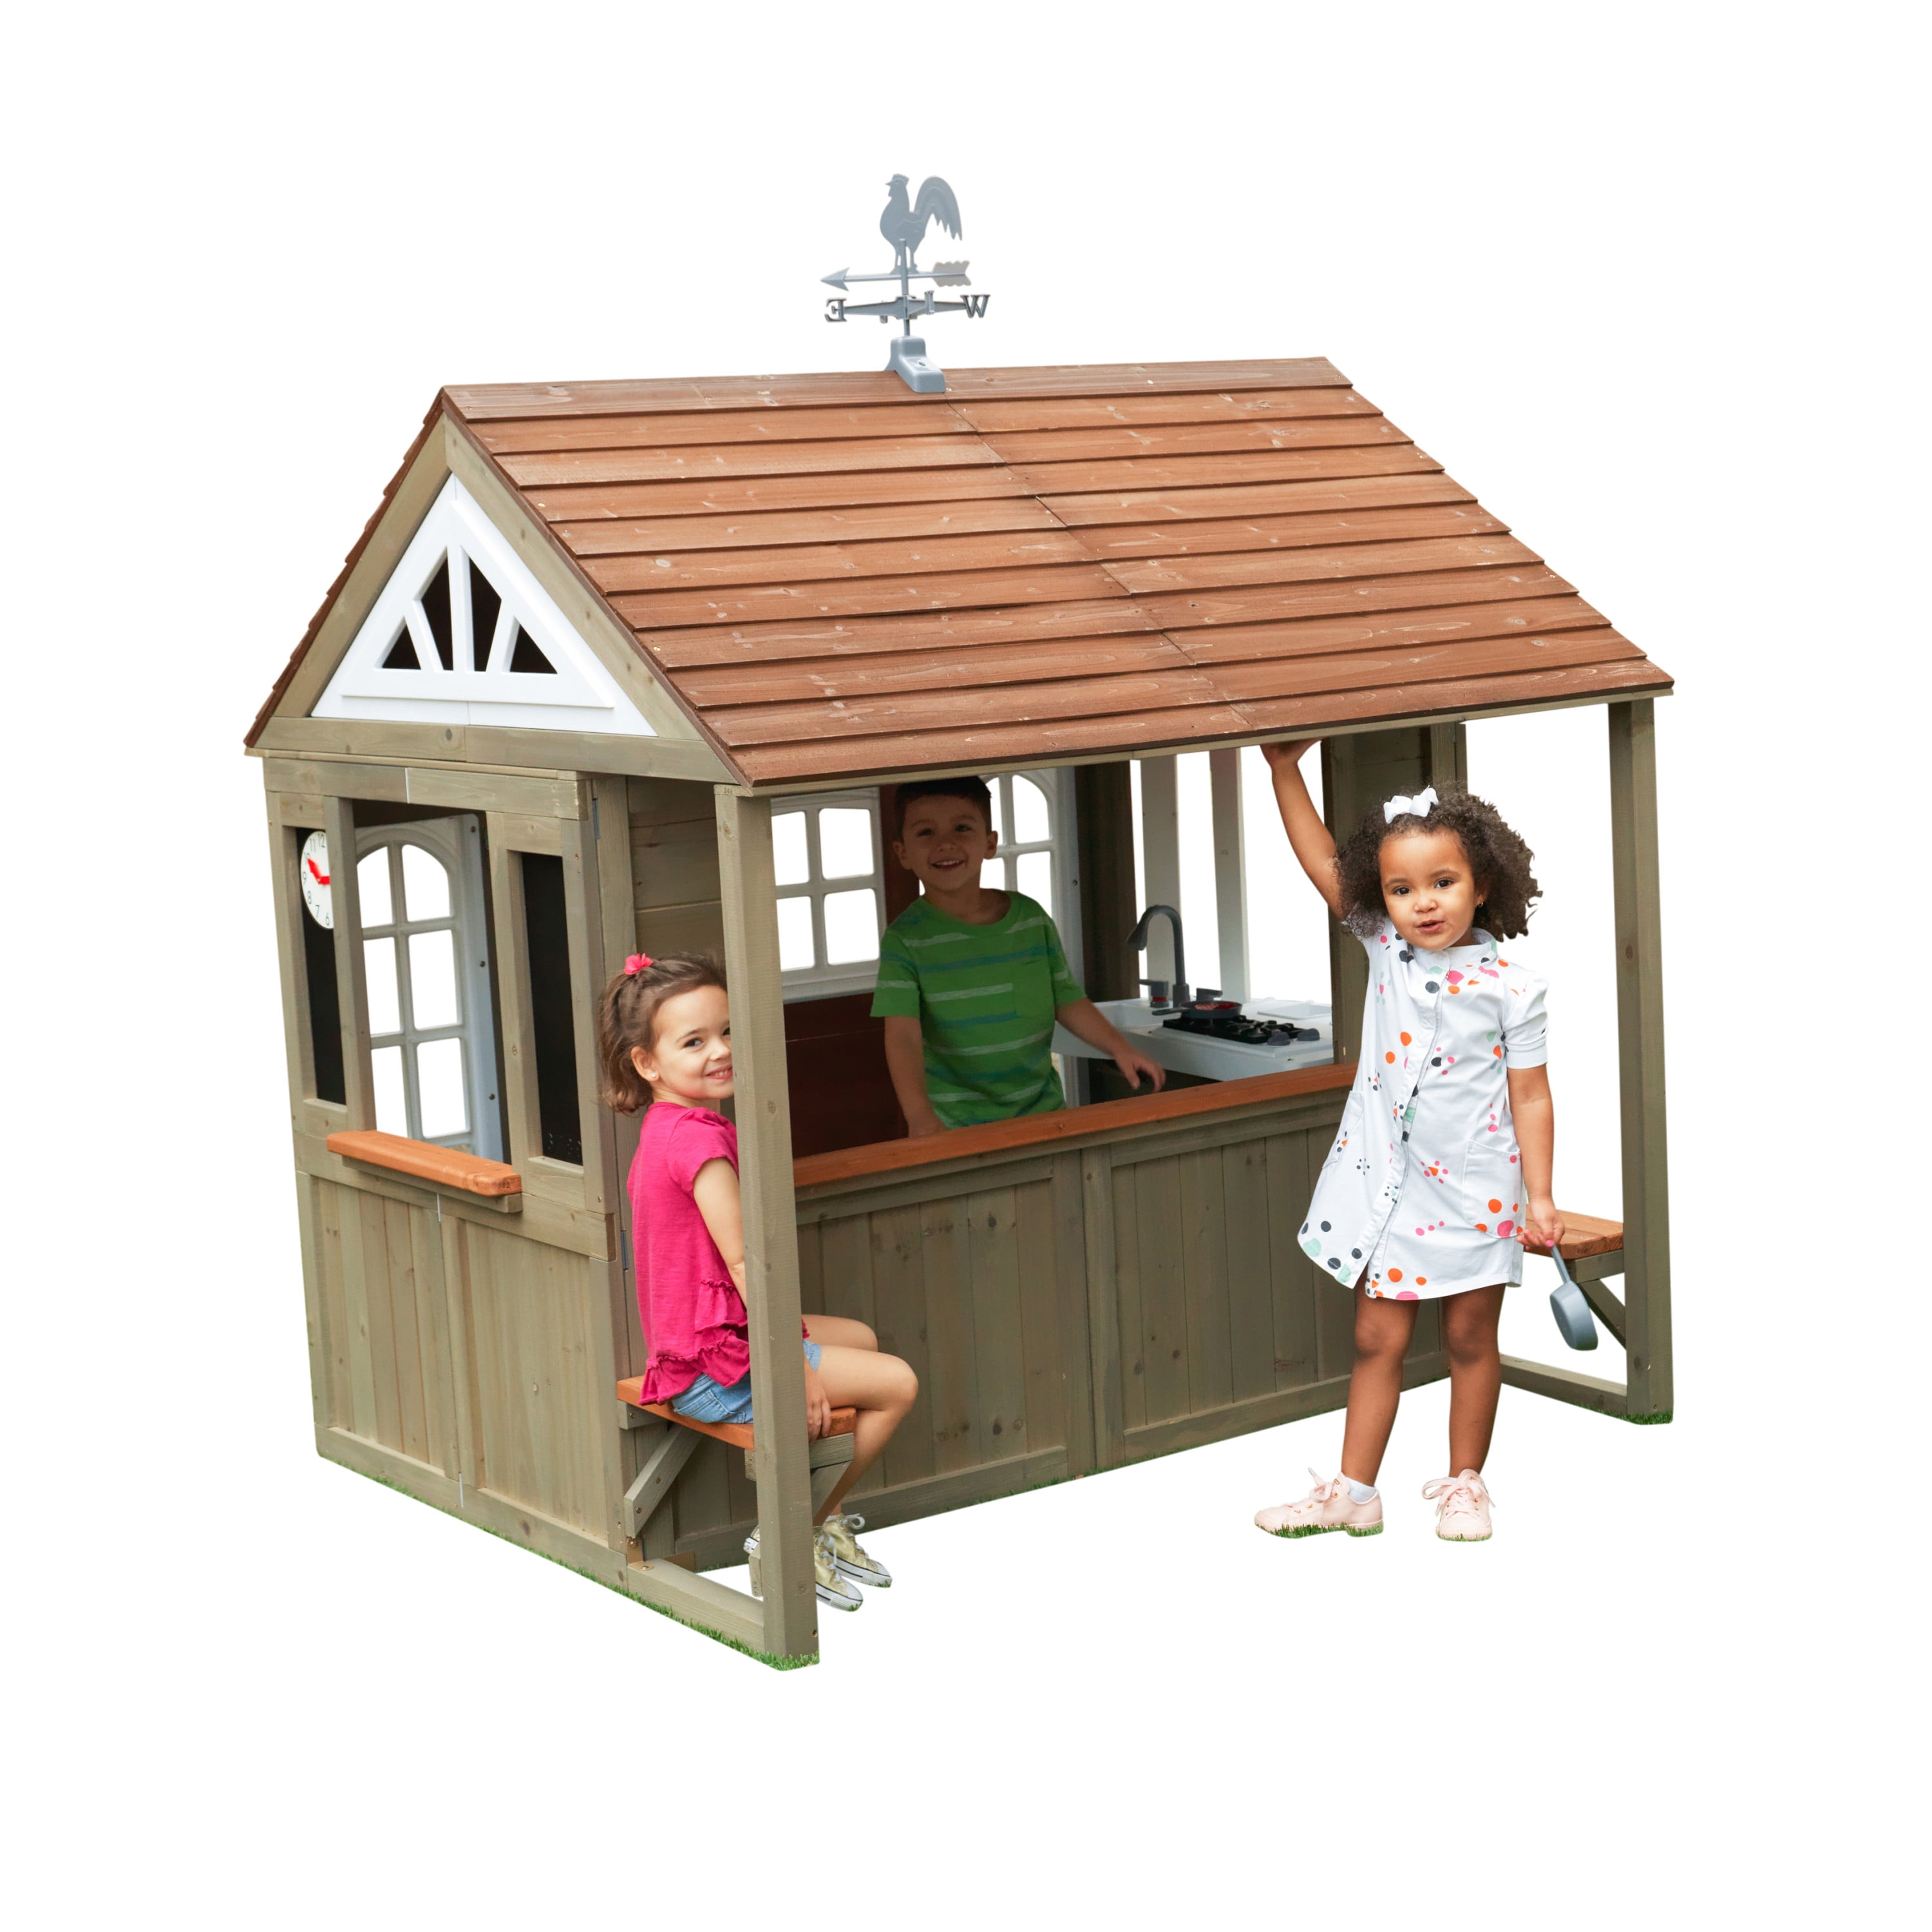 KidKraft Country Vista Wooden Outdoor Playhouse with Double Doors, Play Kitchen & Benches